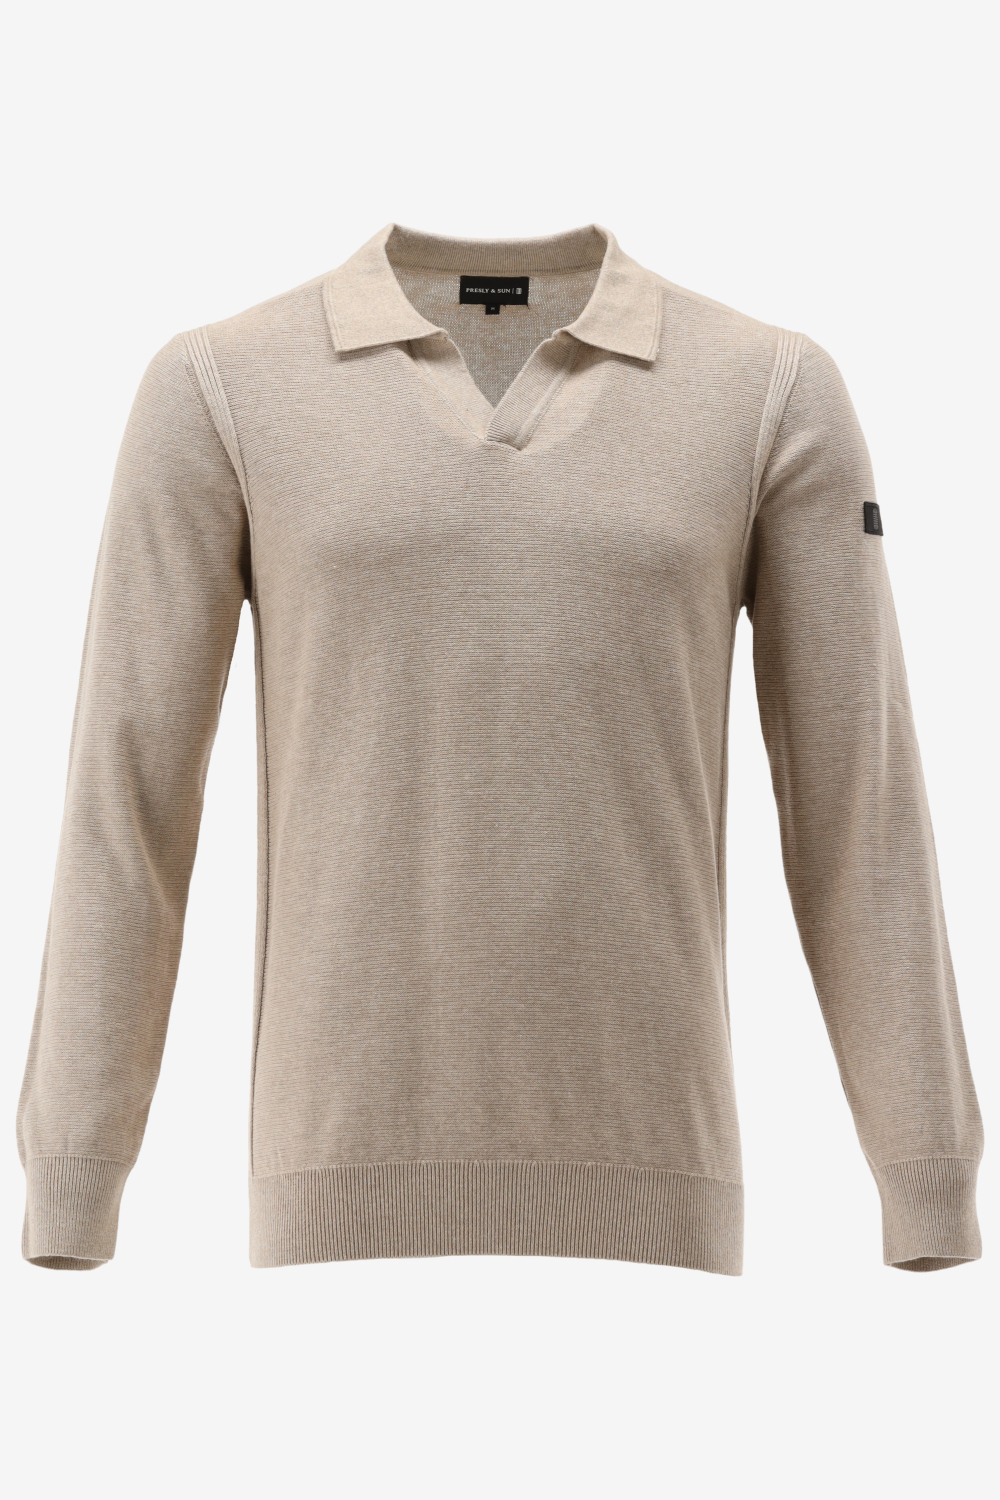 Presly & Sun - Heren open polo ribbed - Charles - Taupe - XXL